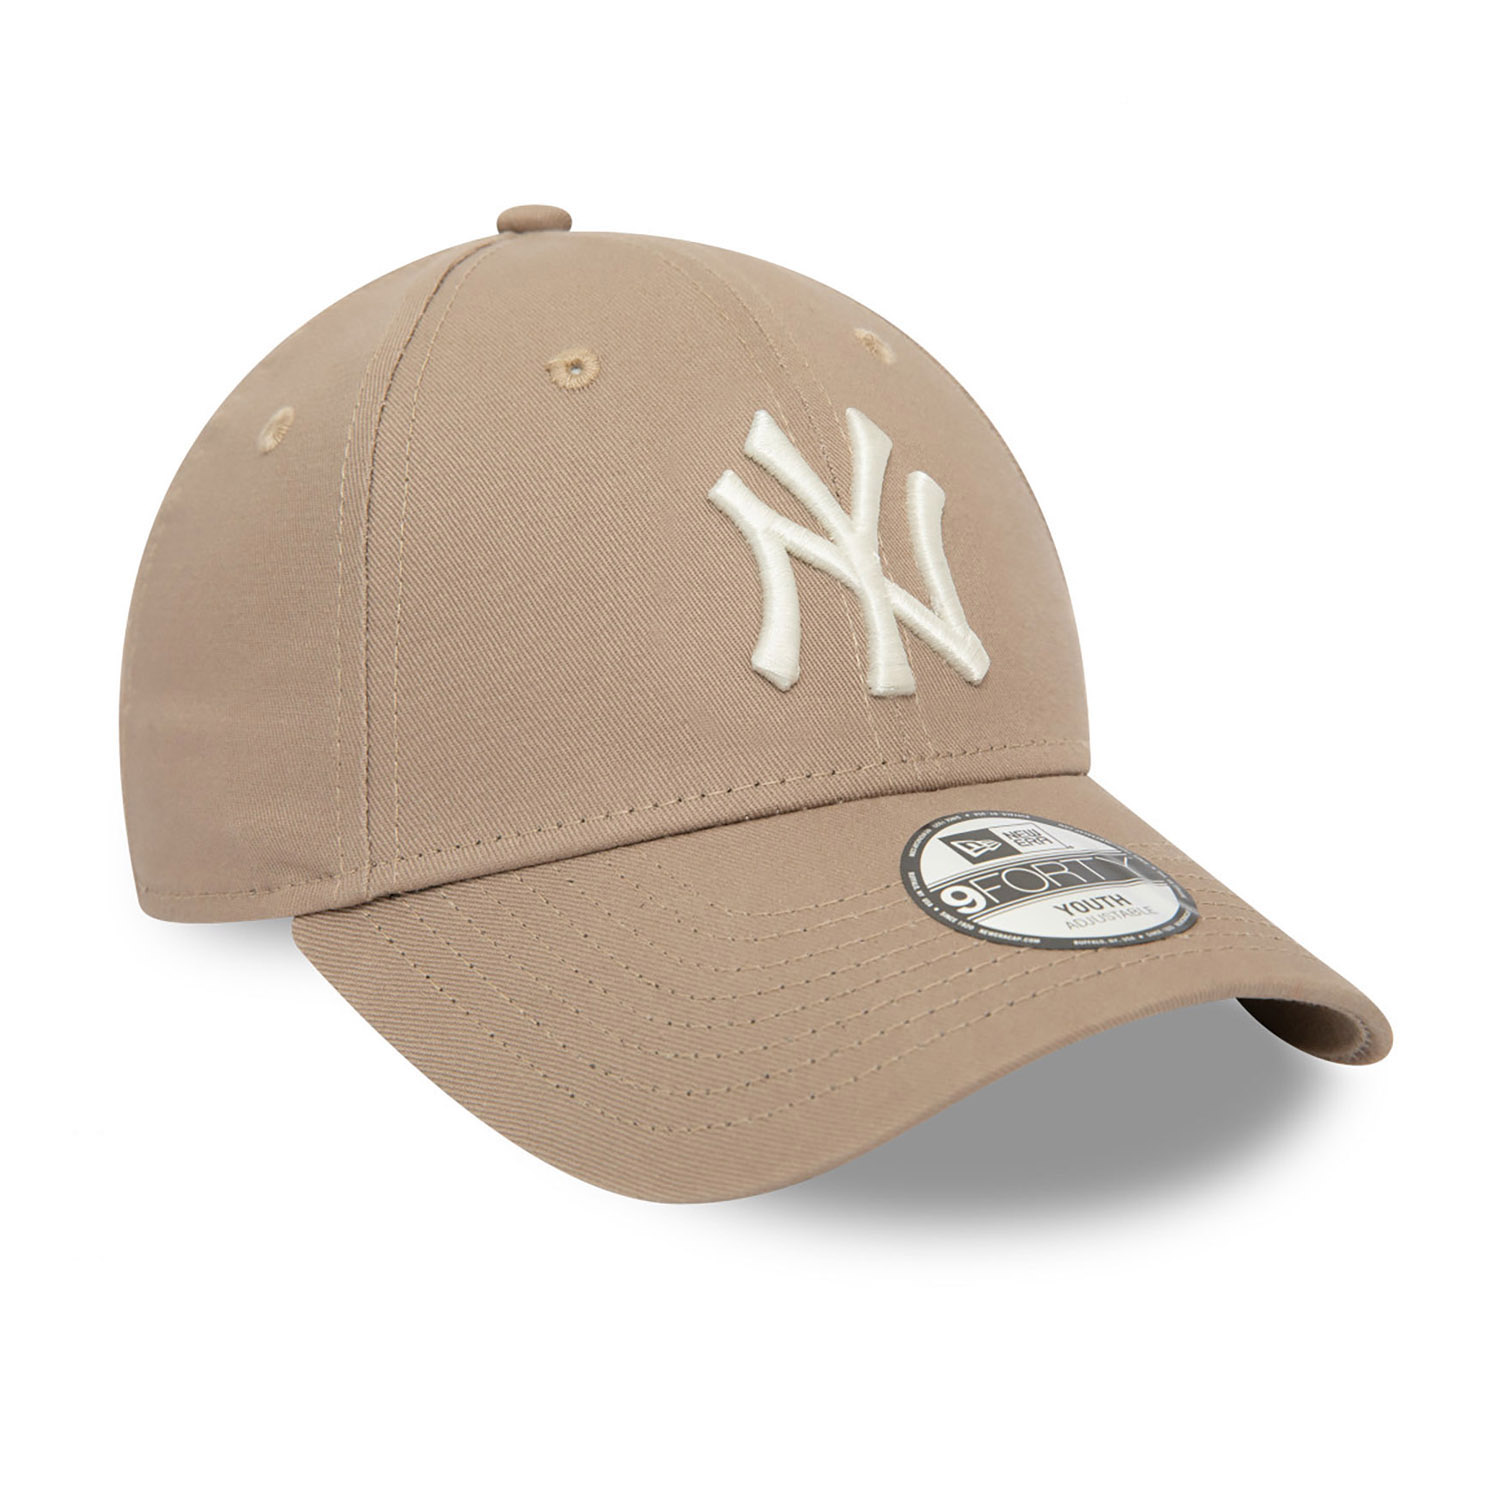 New York Yankees Youth League Essential Beige 9FORTY Adjustable Cap